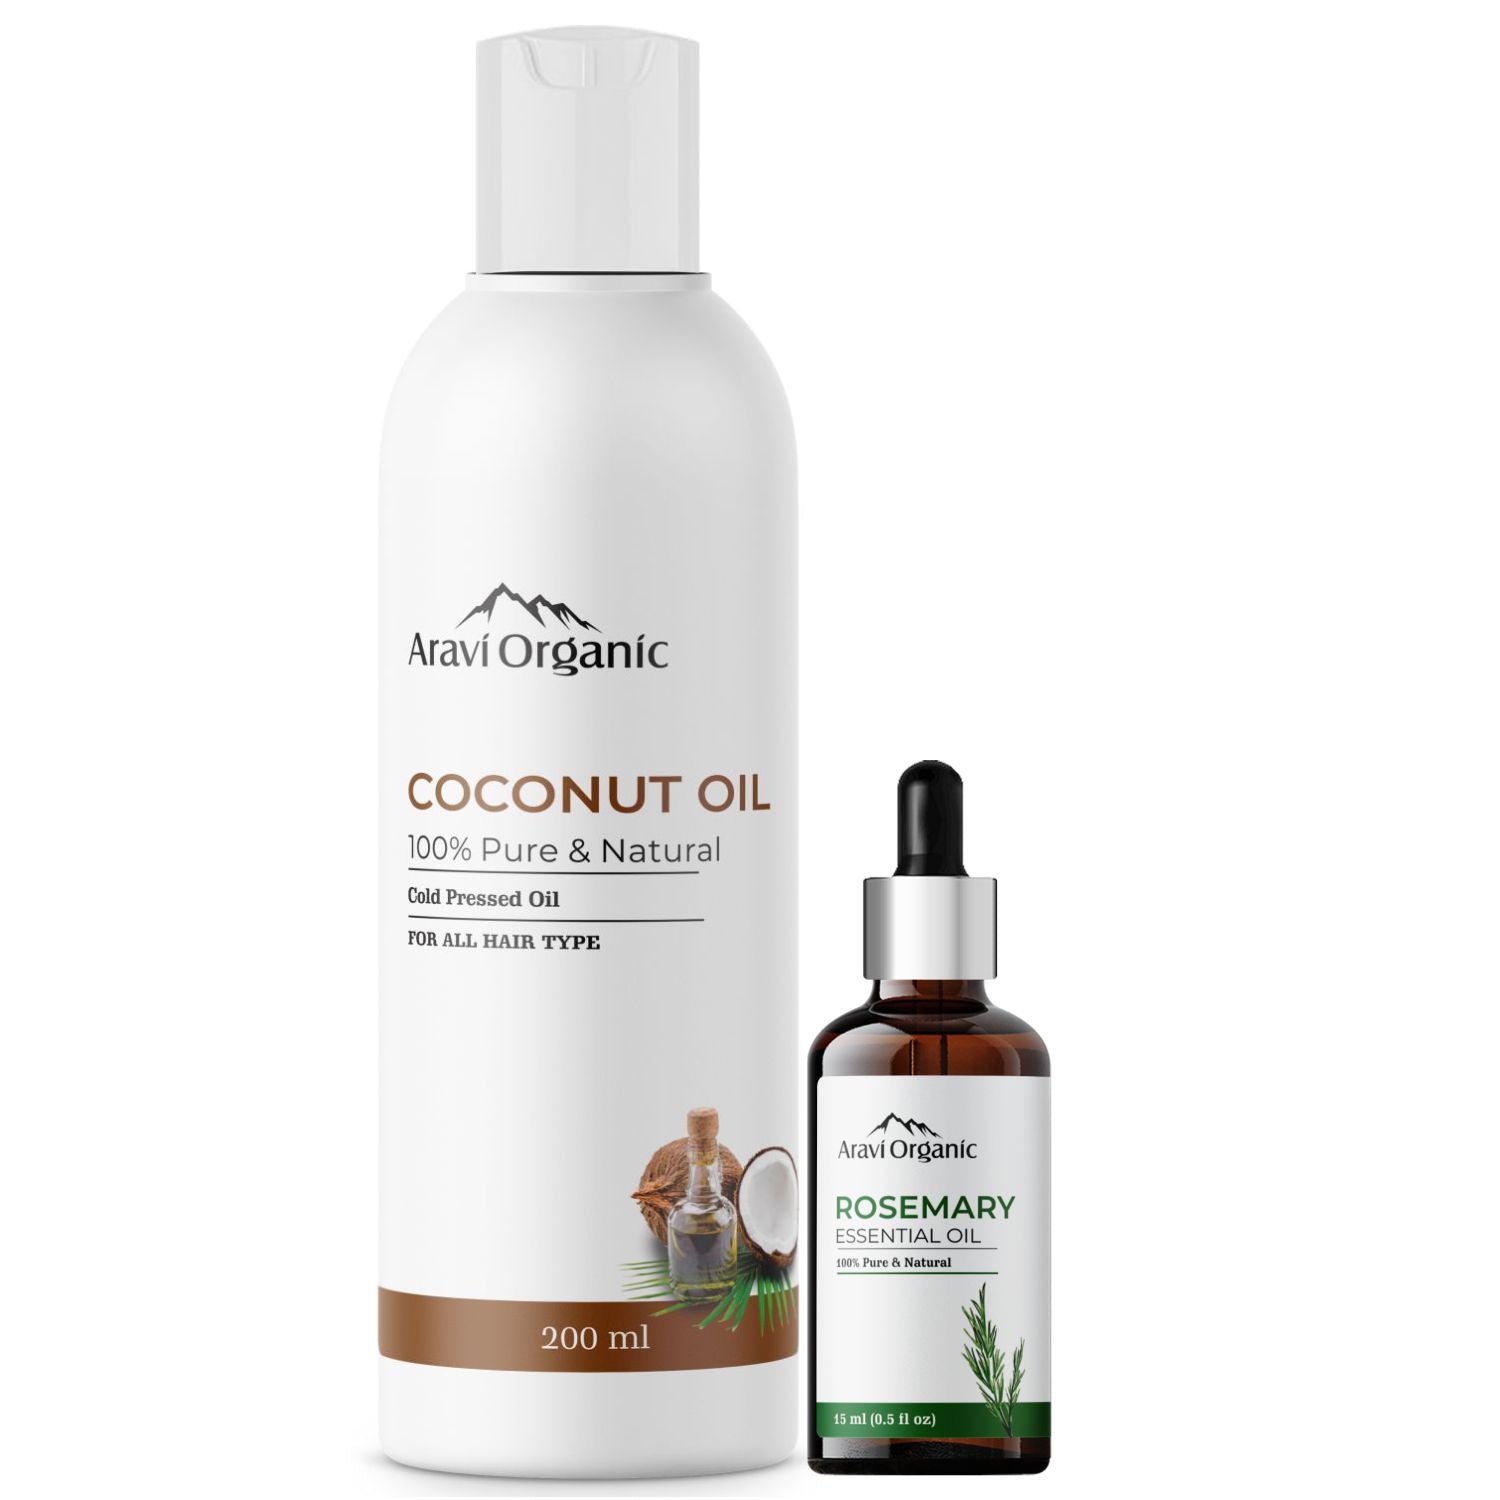 100% Pure Extra Virgin Cold Pressed Coconut Oil with Rosemary Essential Oil for Hair Growth.